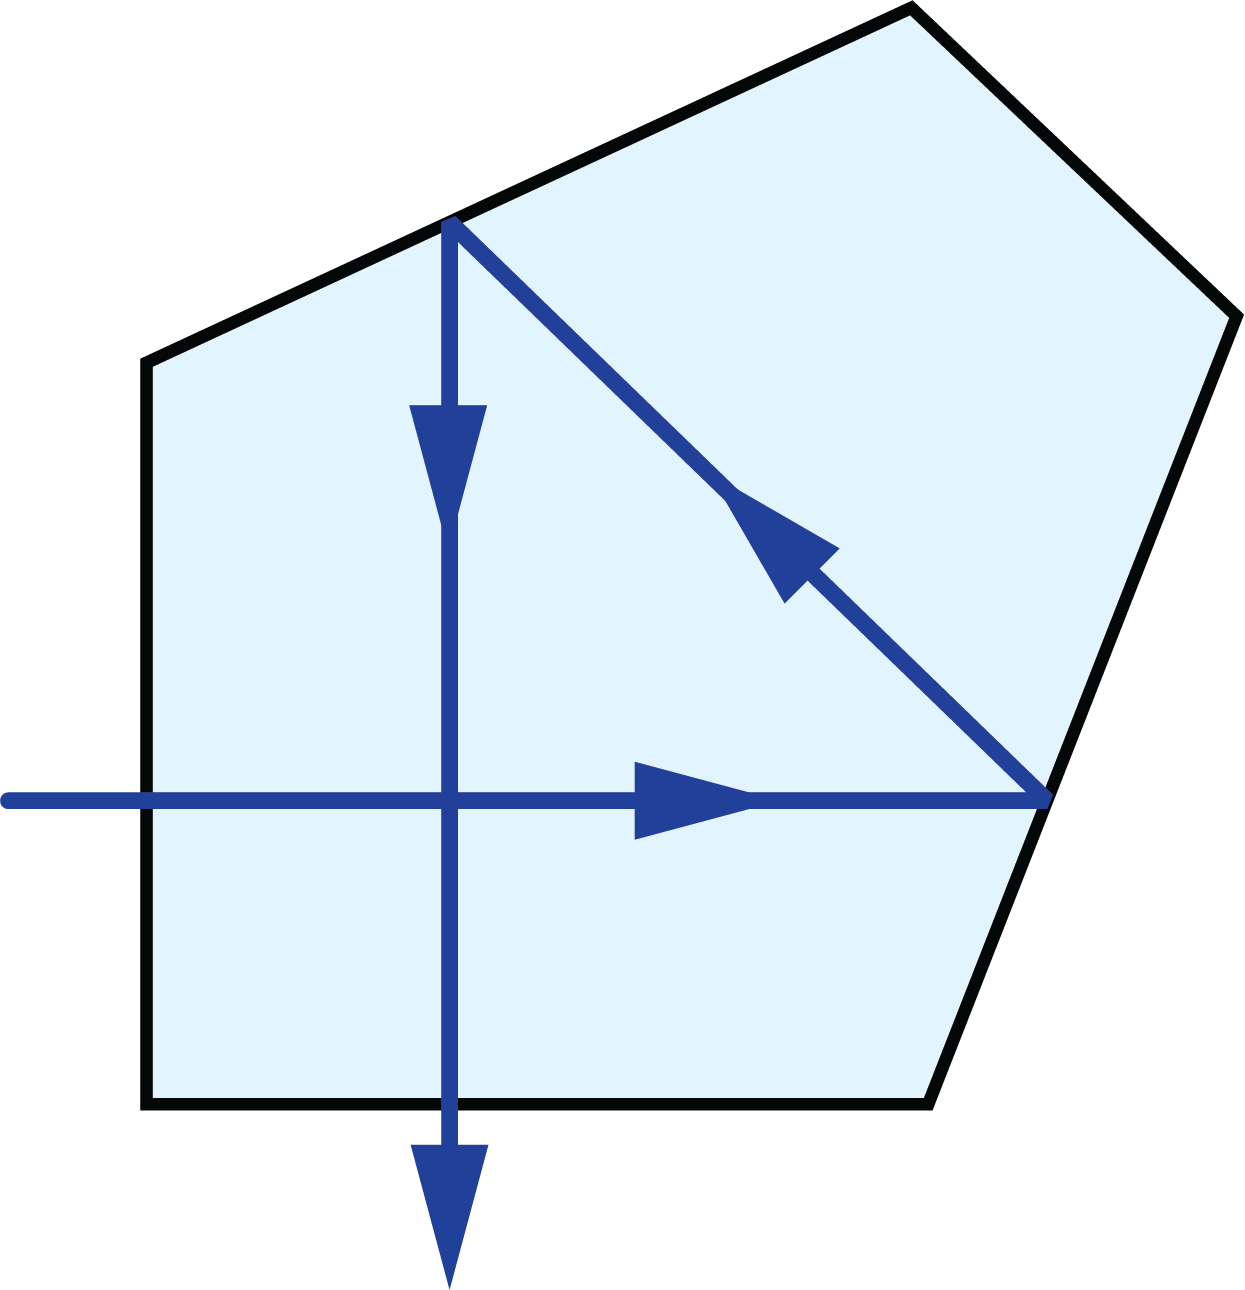 the typical ray-path diagram for a penta prism